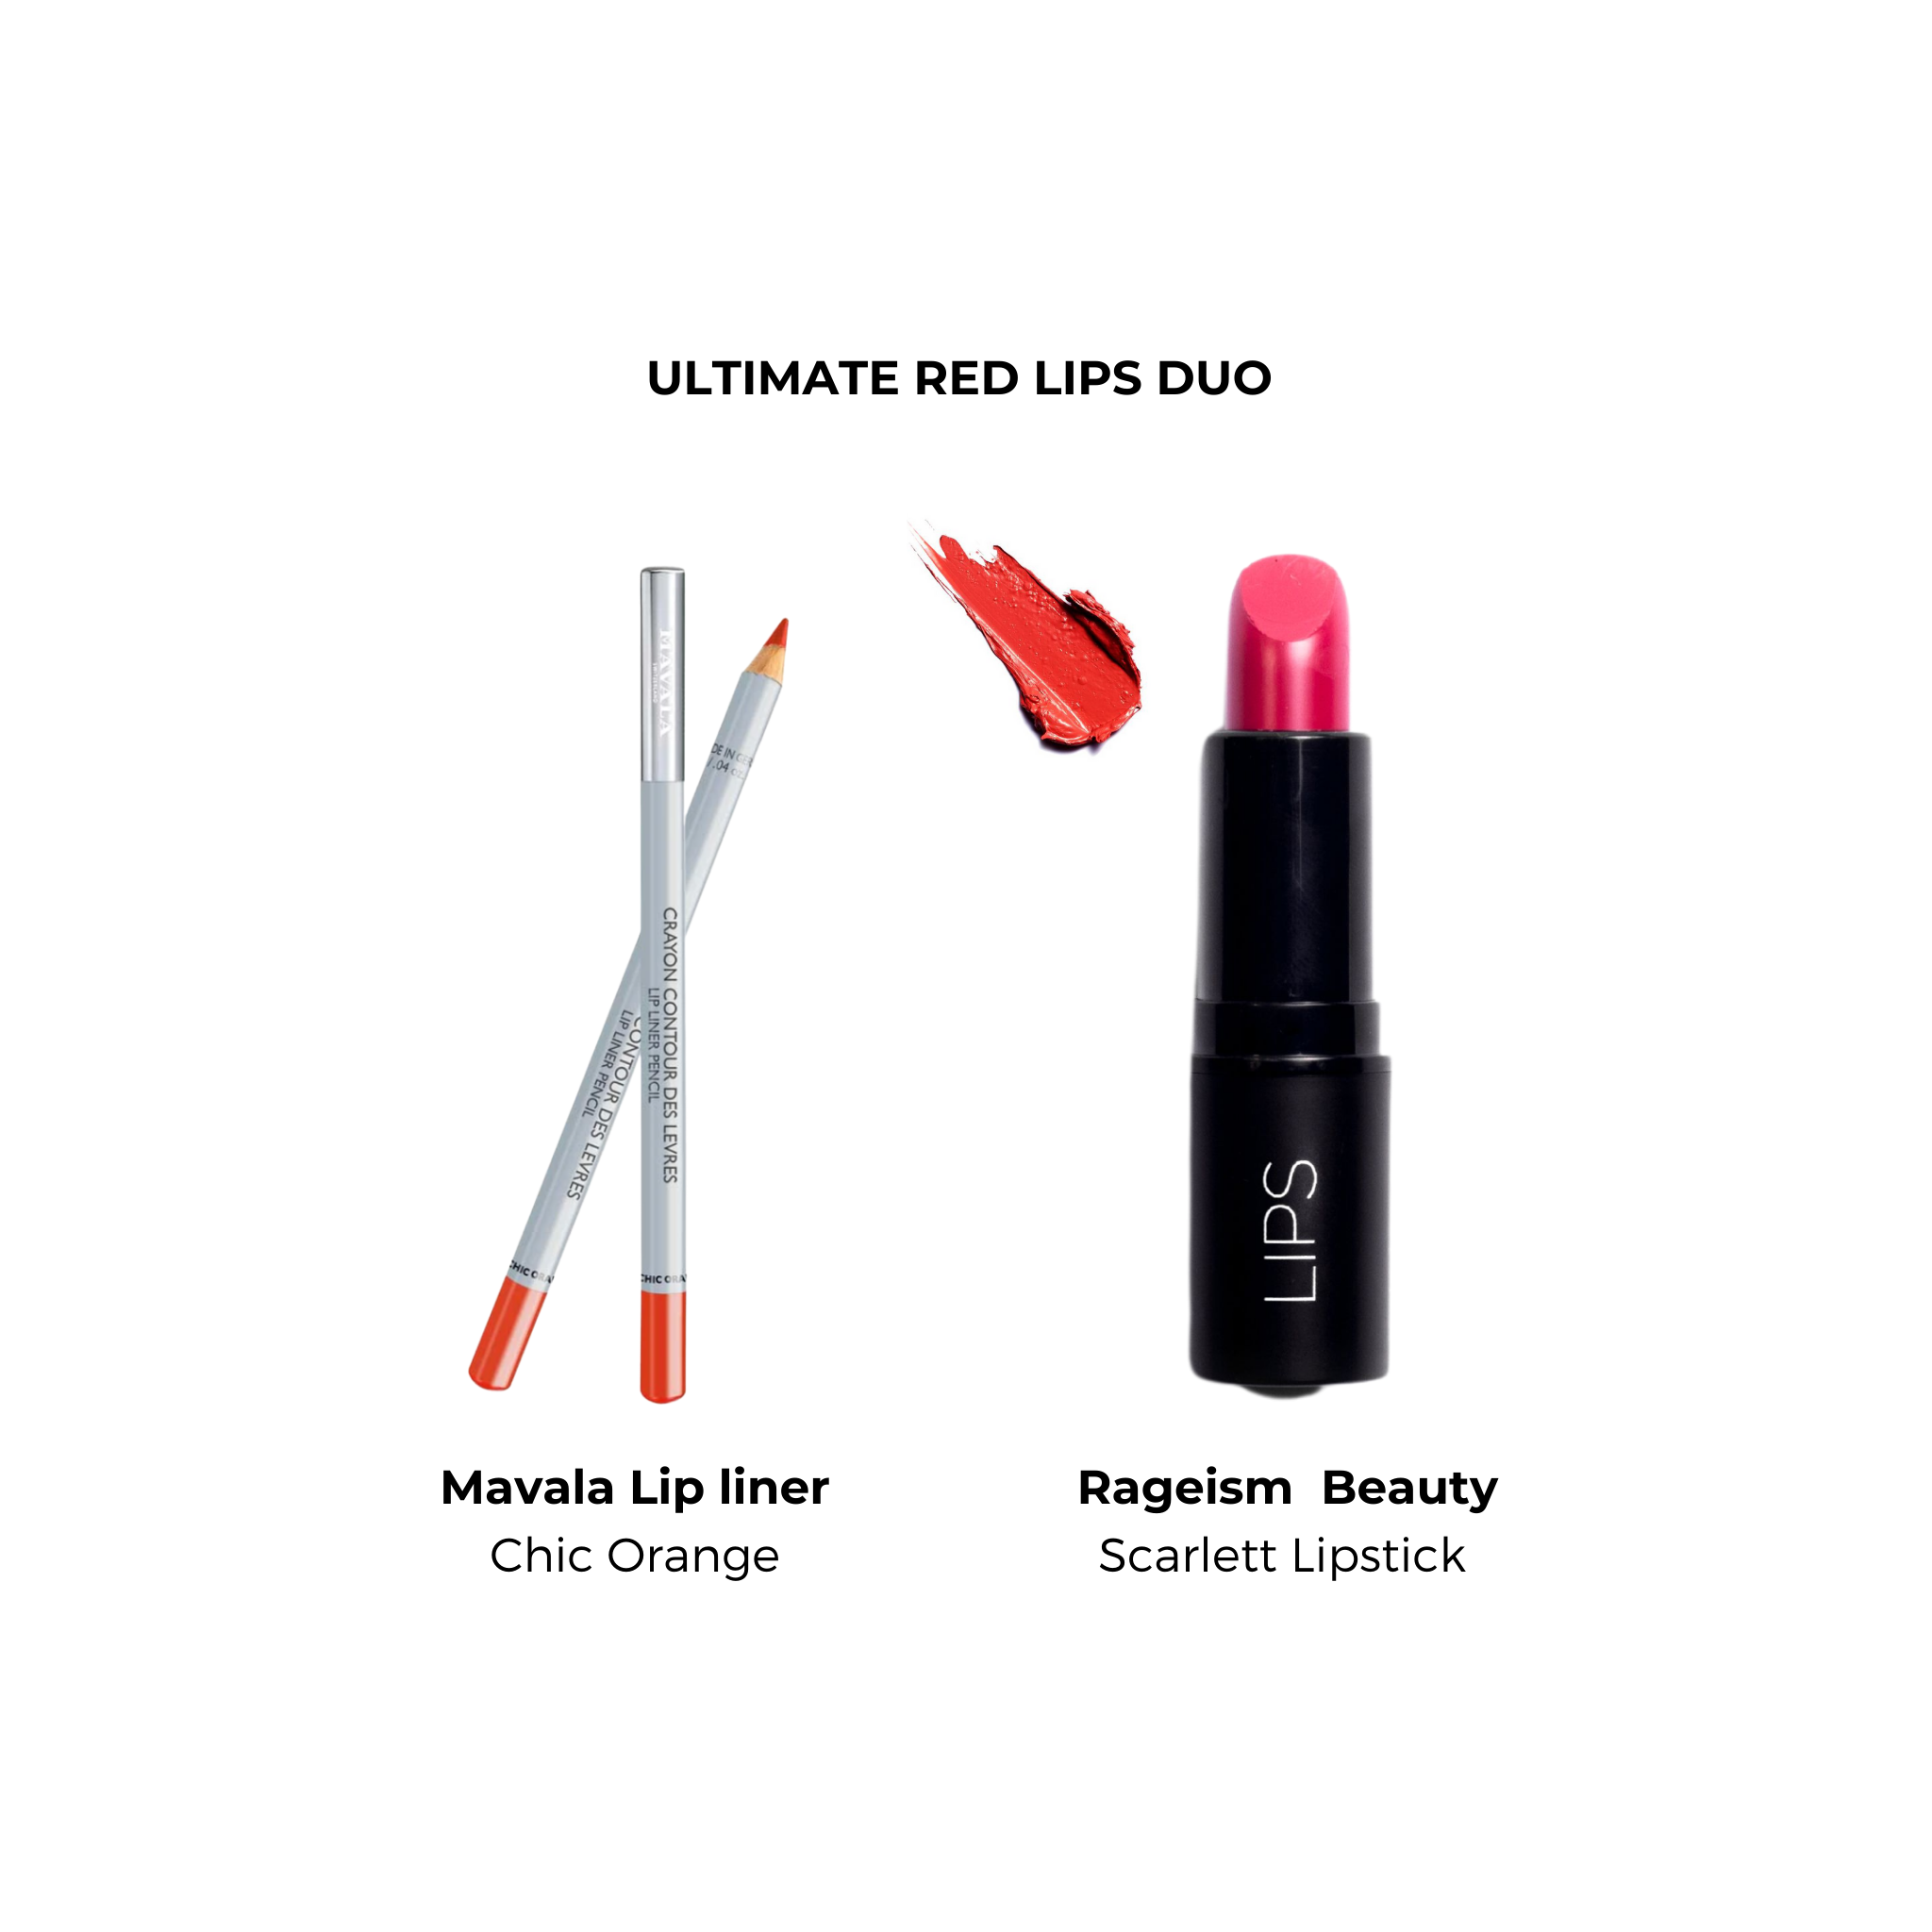 The Ultimate Red Lips Duo